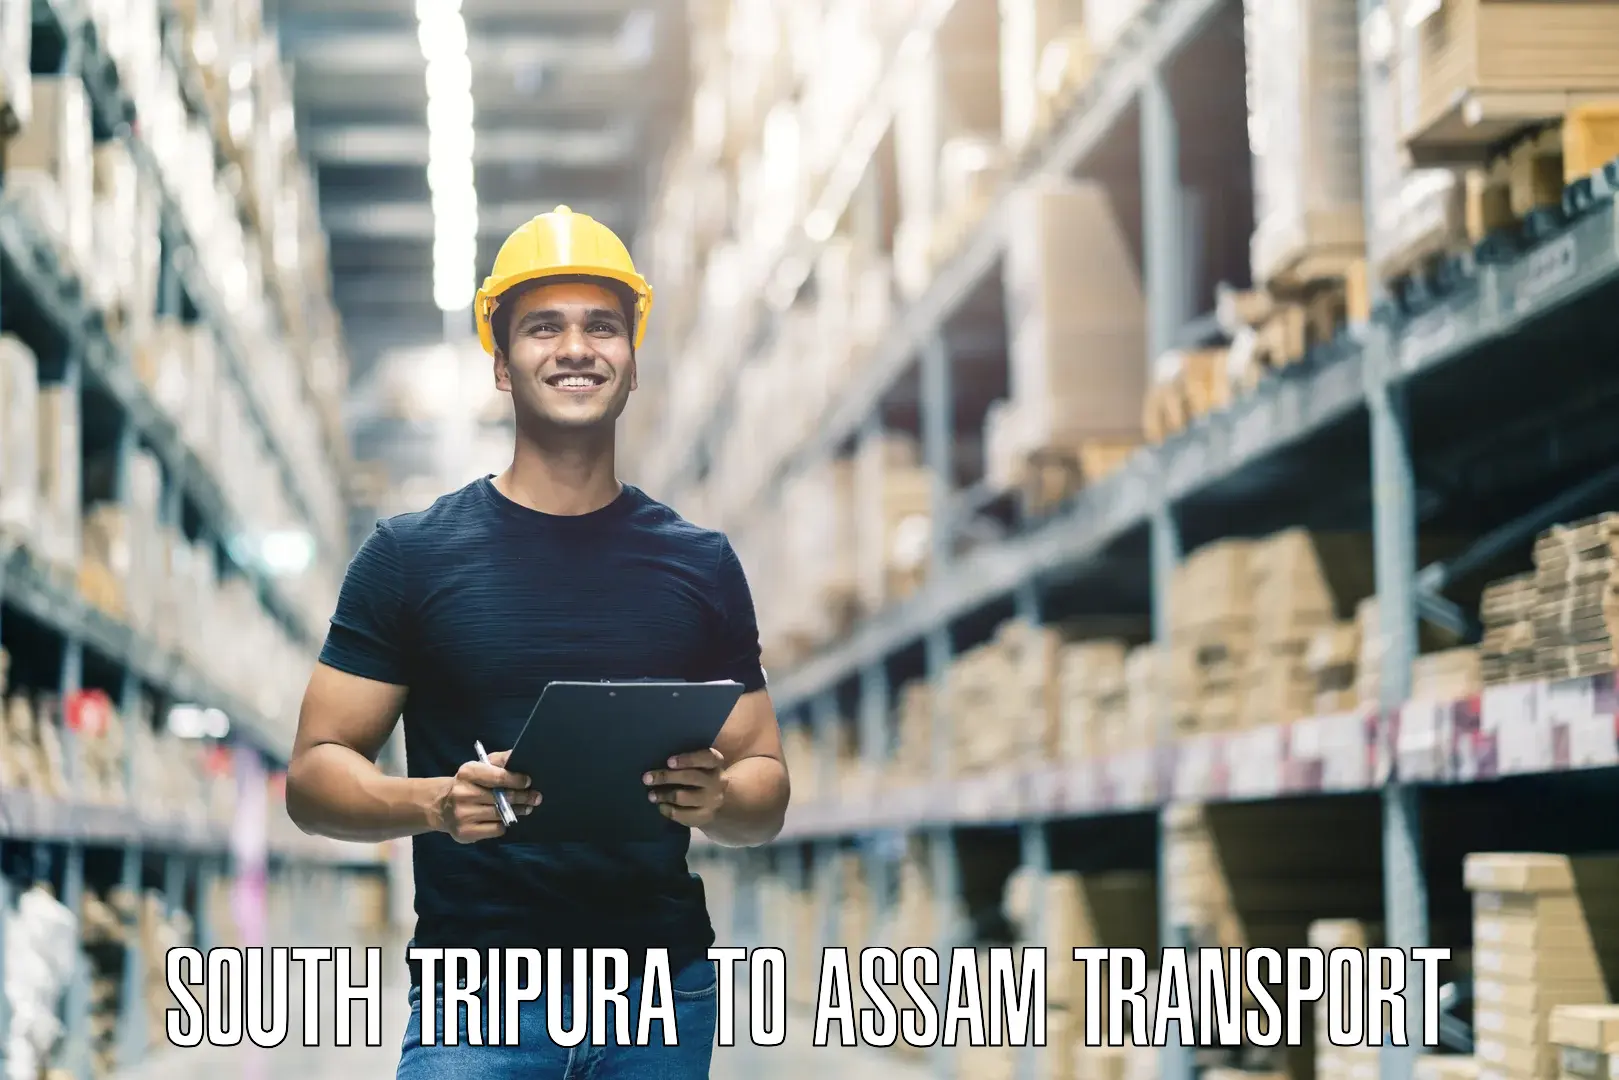 Domestic goods transportation services South Tripura to Guwahati